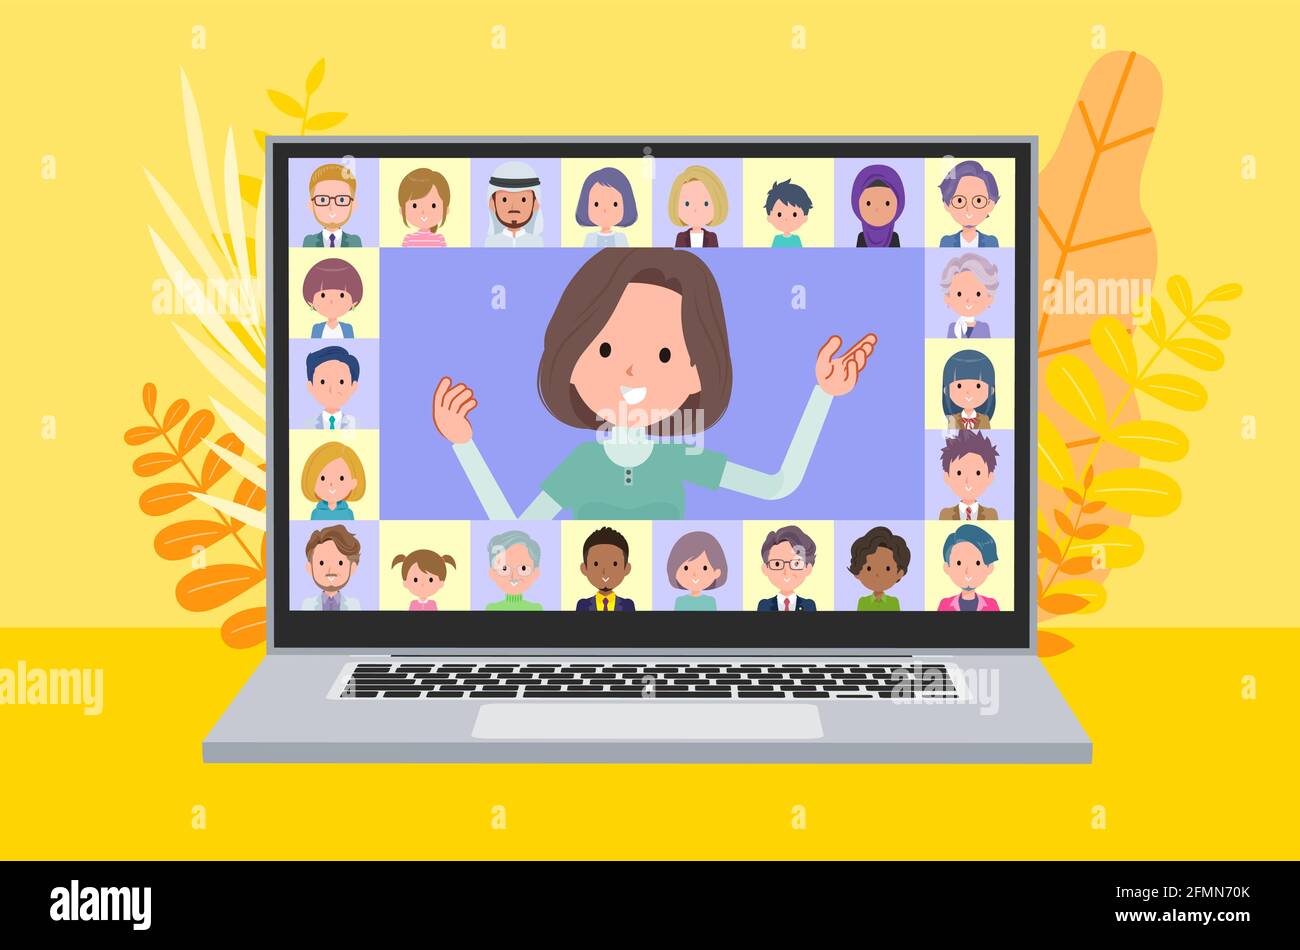 A set of middle-aged women in tunic presenting online.It's vector art so easy to edit. Stock Vector